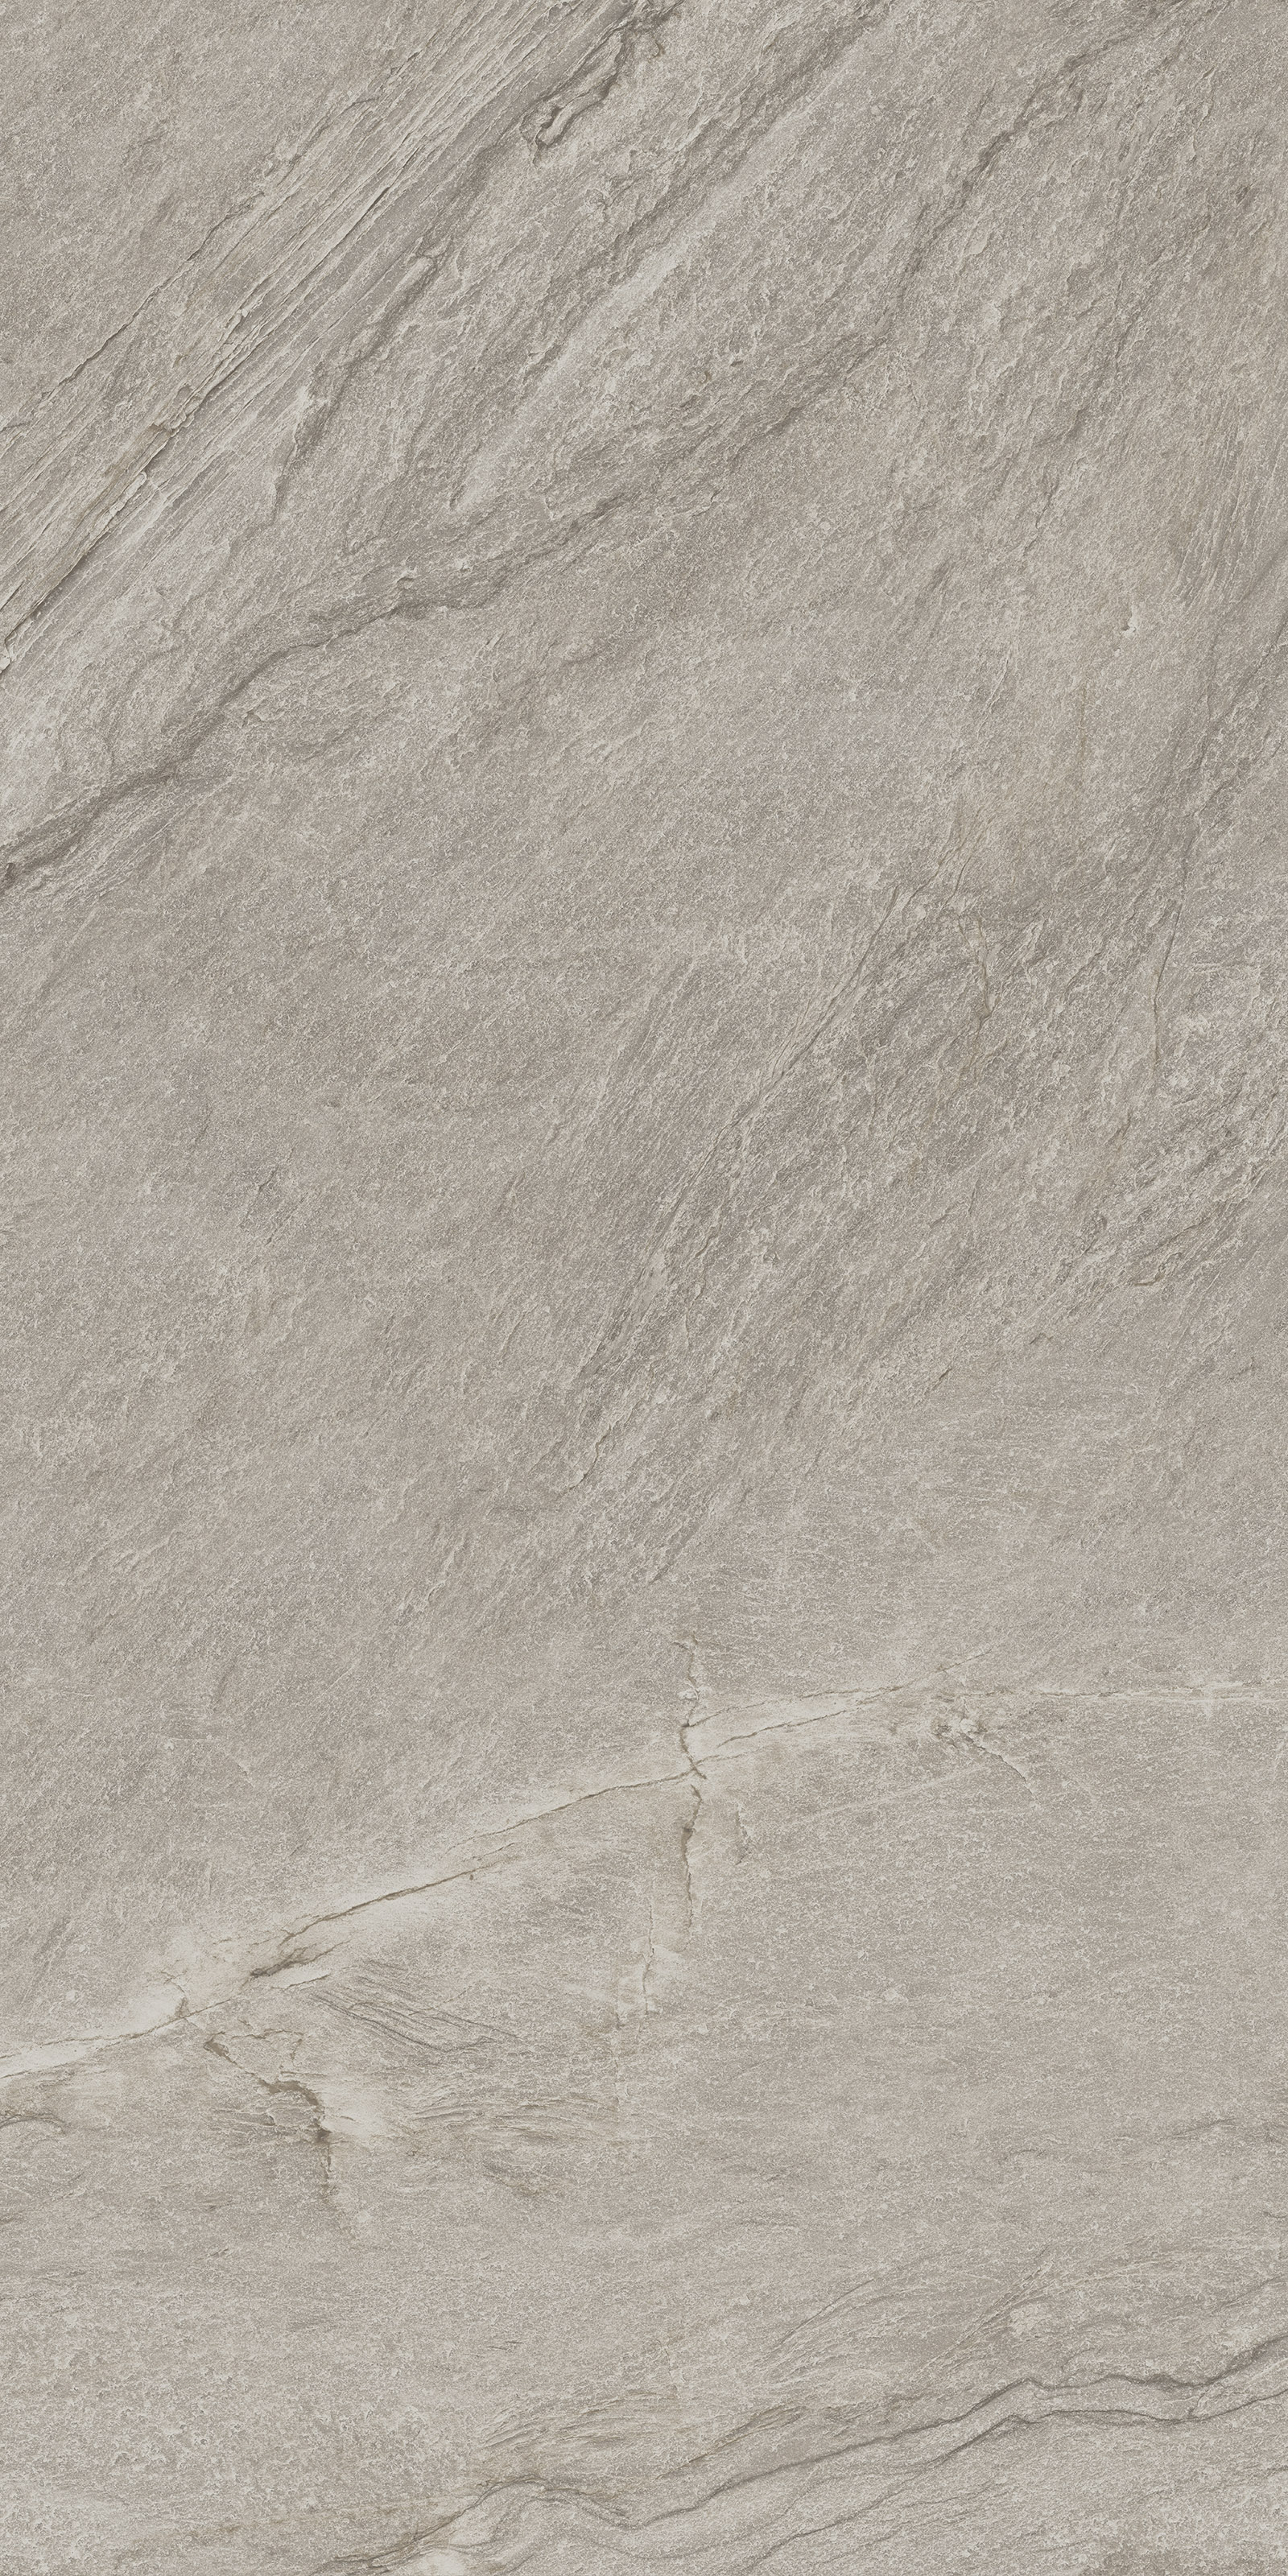 Imola Vibes Beige Scuro Natural Strutturato Matt 179400 90x180cm rectified 10mm - VIBES 9018BS RM